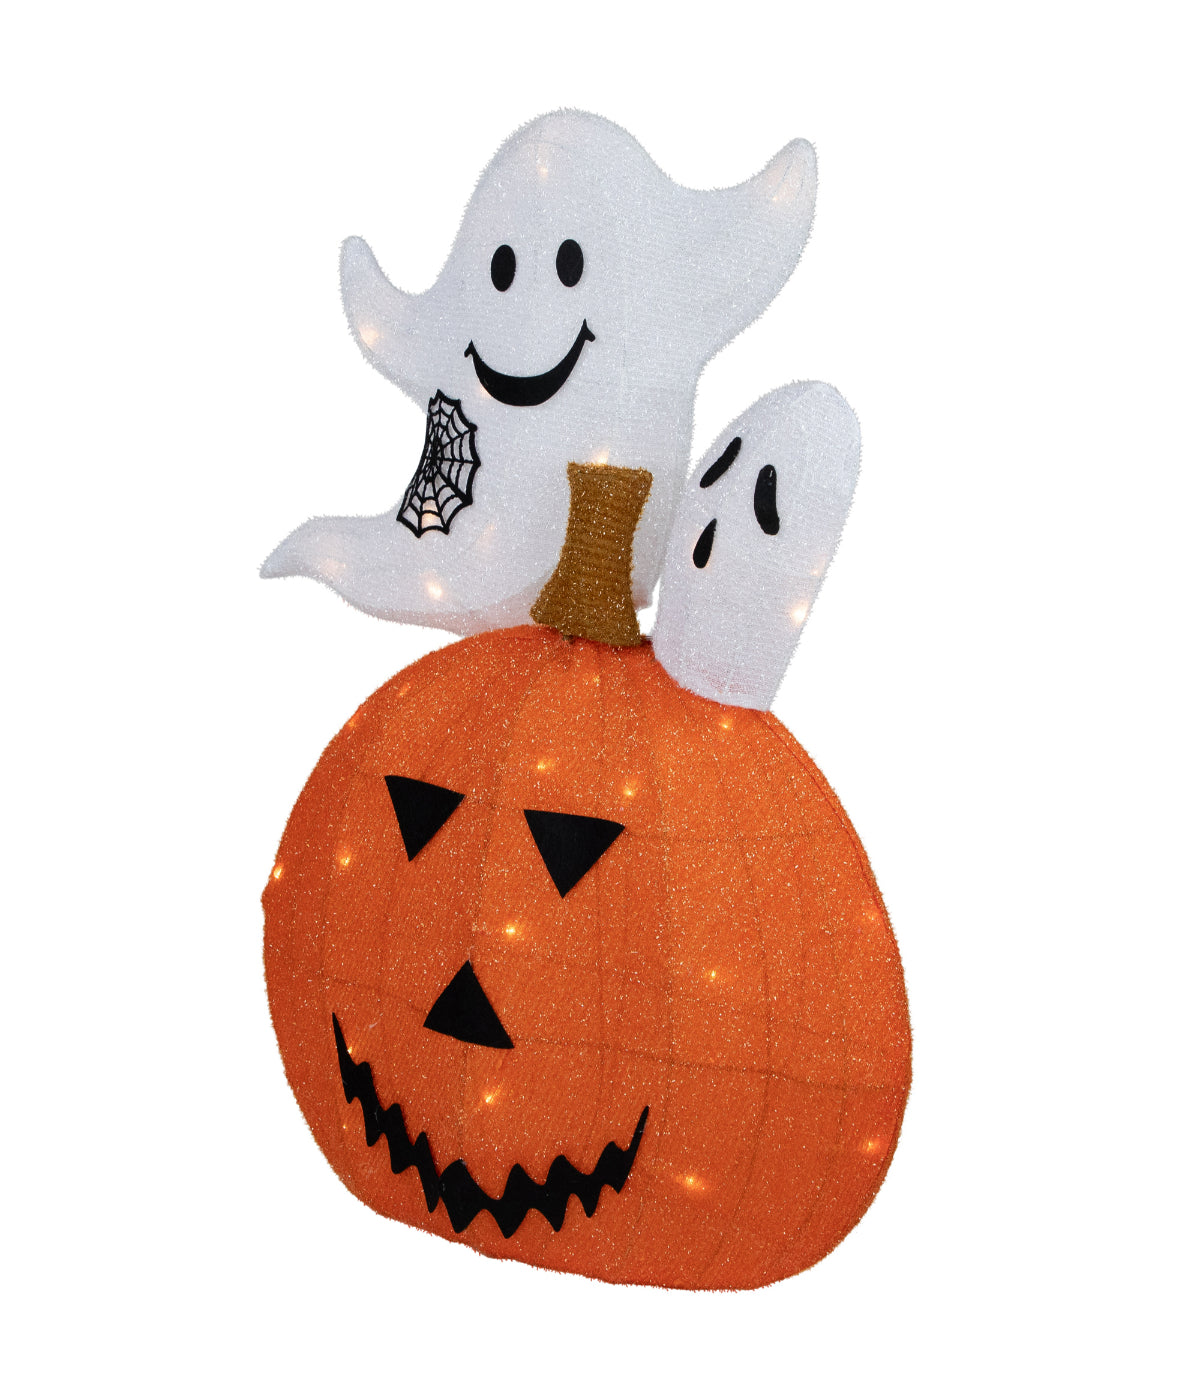 Lighted Battery Operated Jack-O-Lantern and Ghosts Halloween Decoration